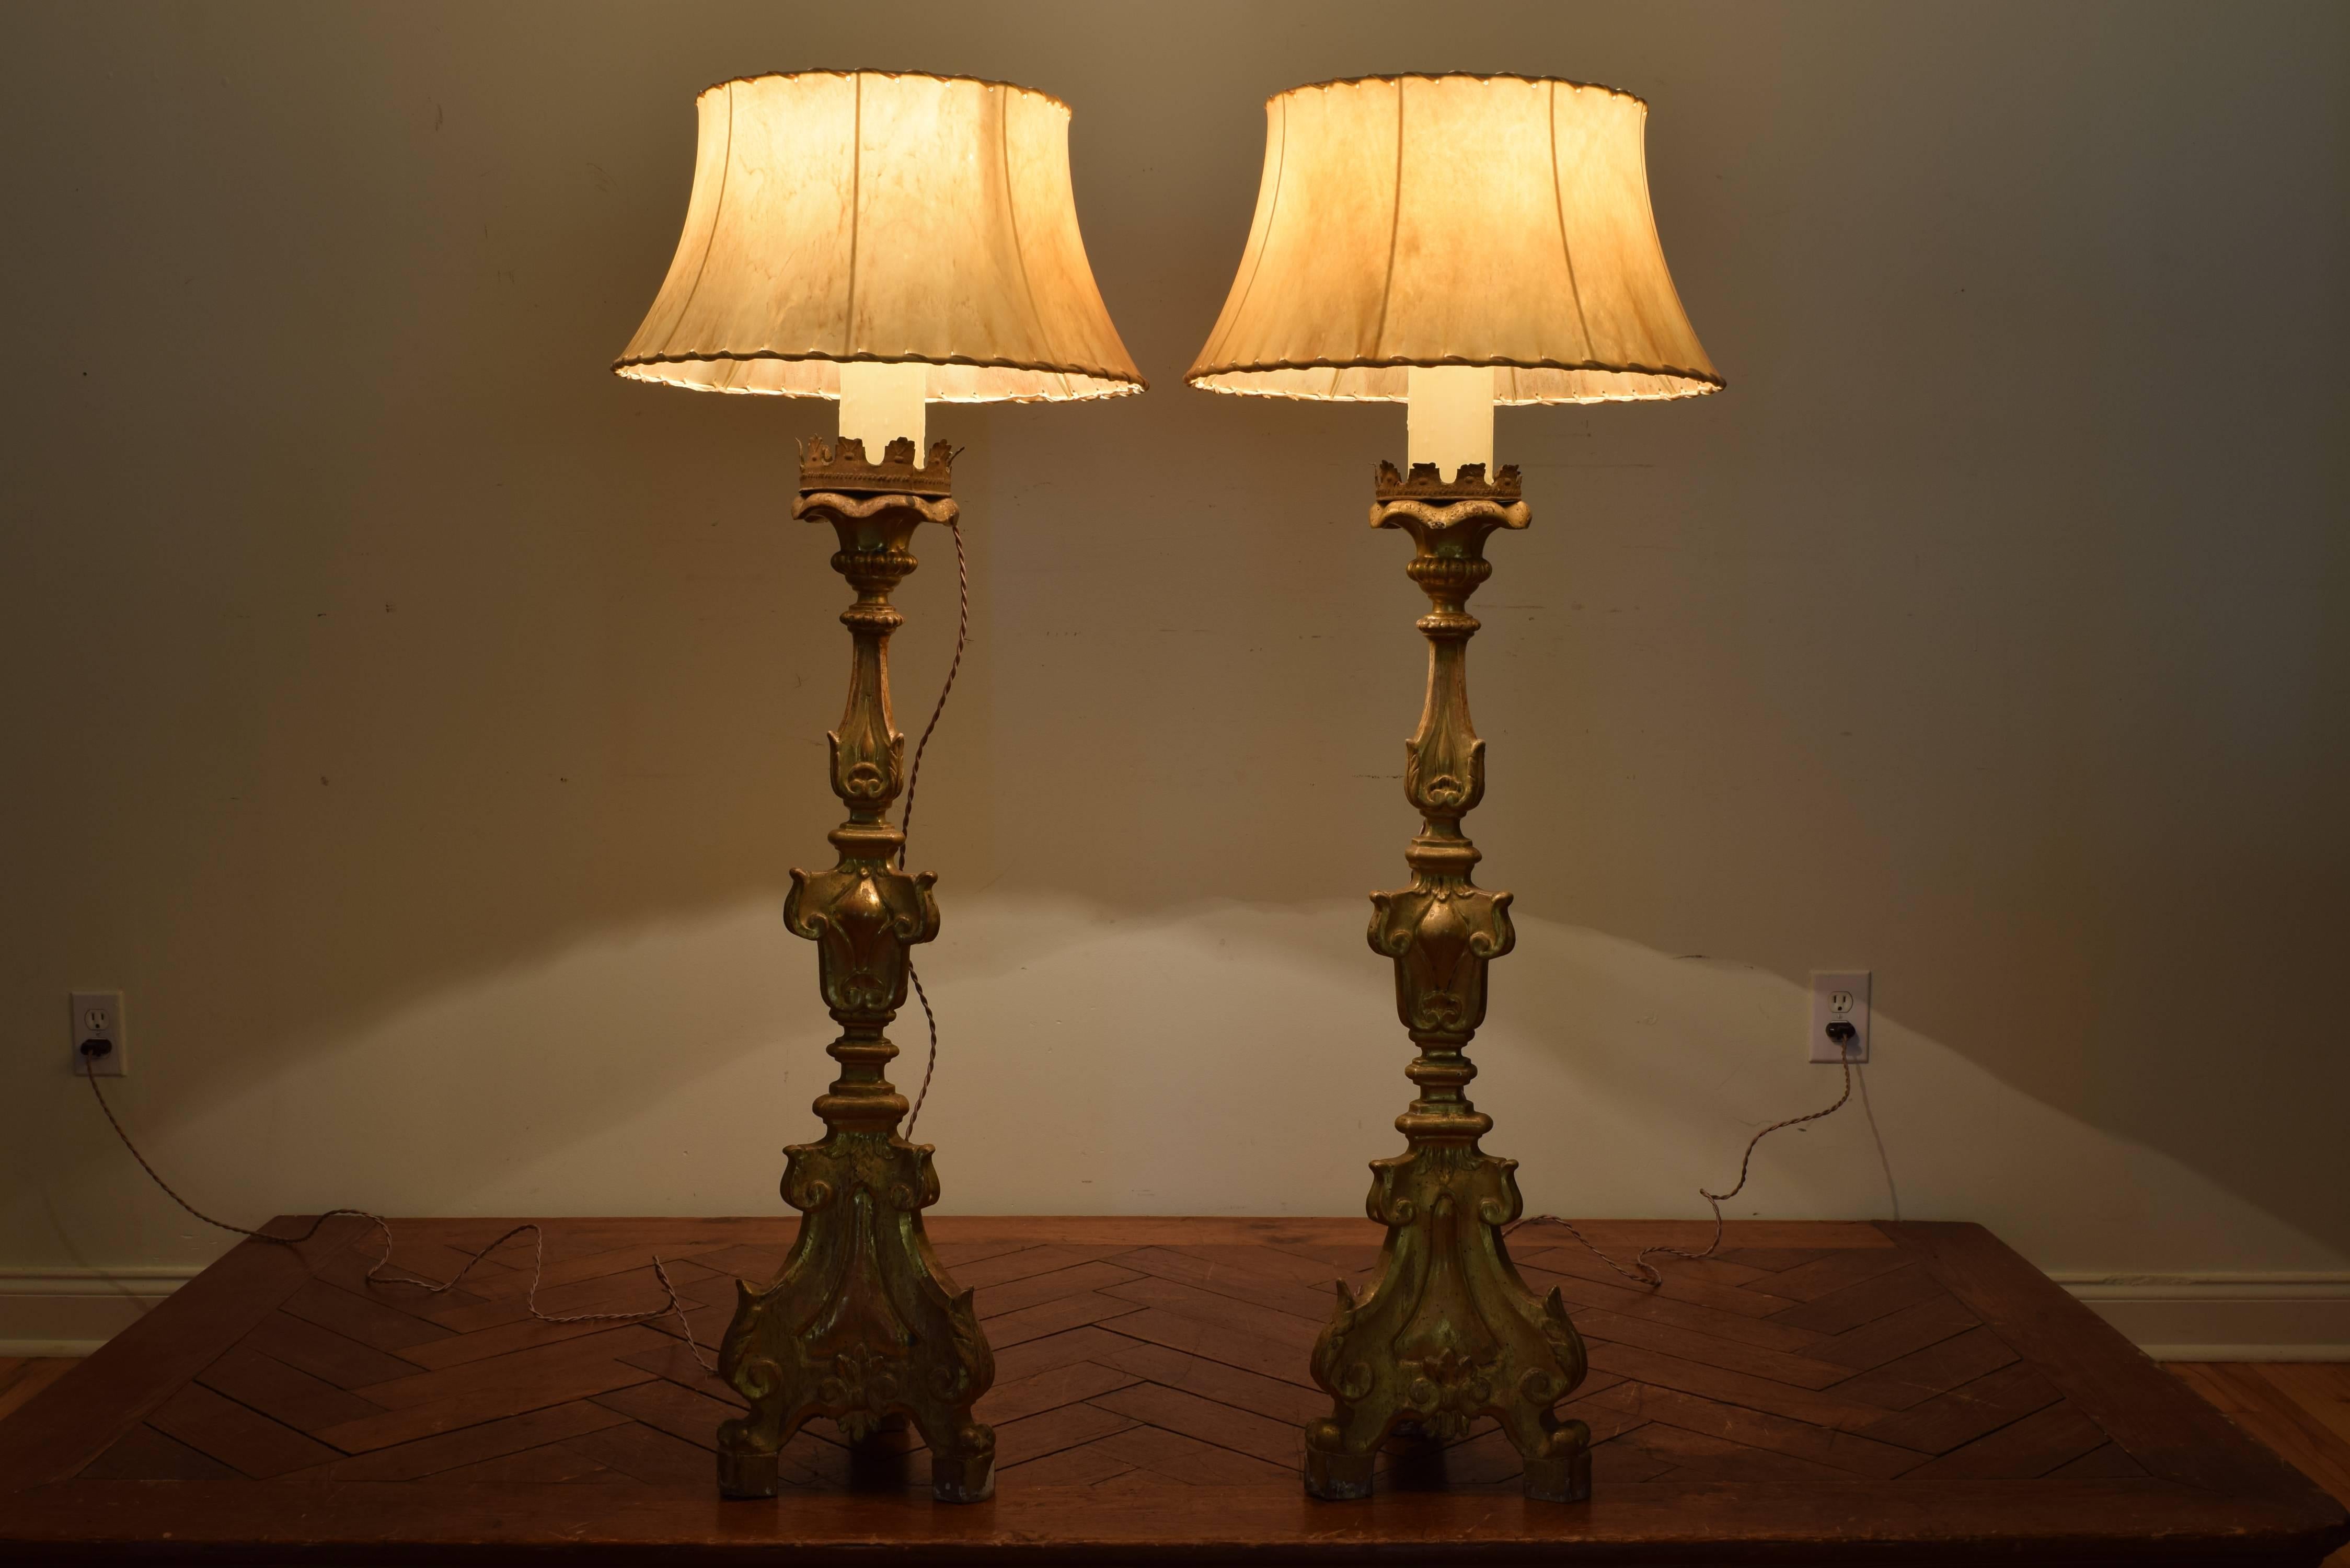 Photographed with hide shades the metal drip pans resting atop two-piece carved and gilded candlesticks, now outwired for electricity. Measurements listed include shades. Height to top of metal drip pans is 38 inches; diameter of candlestick bases